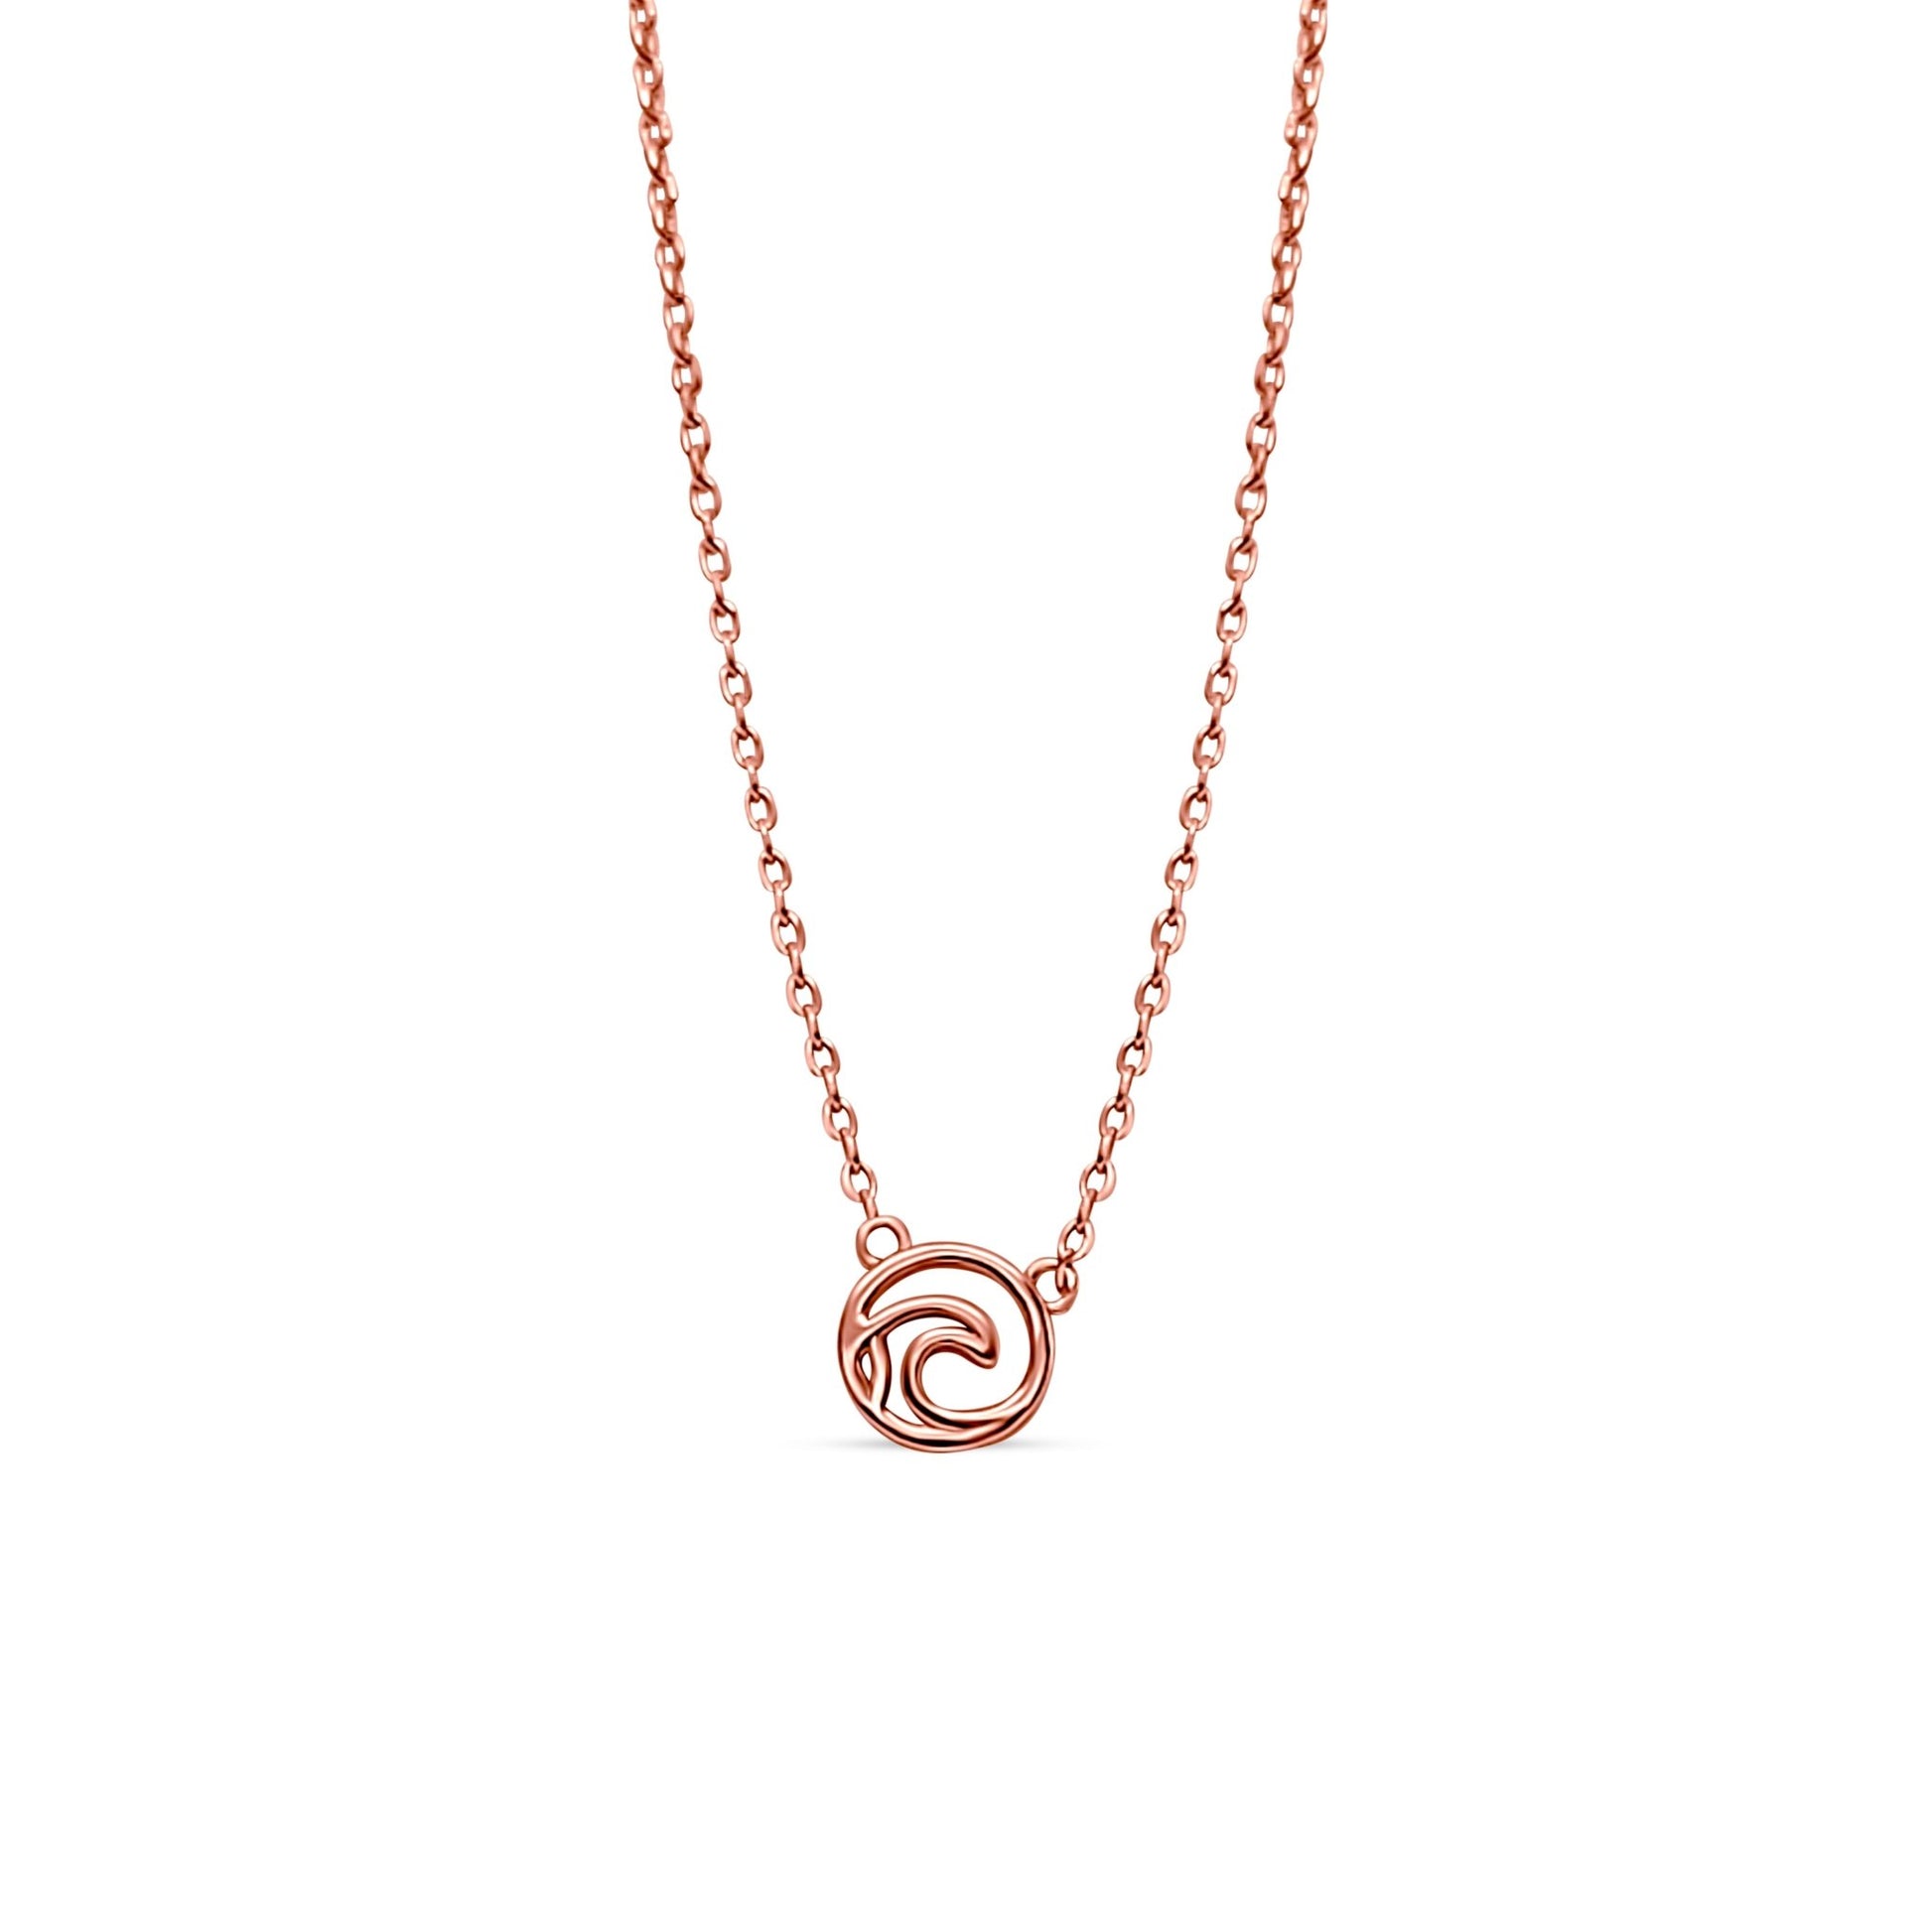 18k rose gold plated sterling silver Tofino ocean wave adjustable necklace 